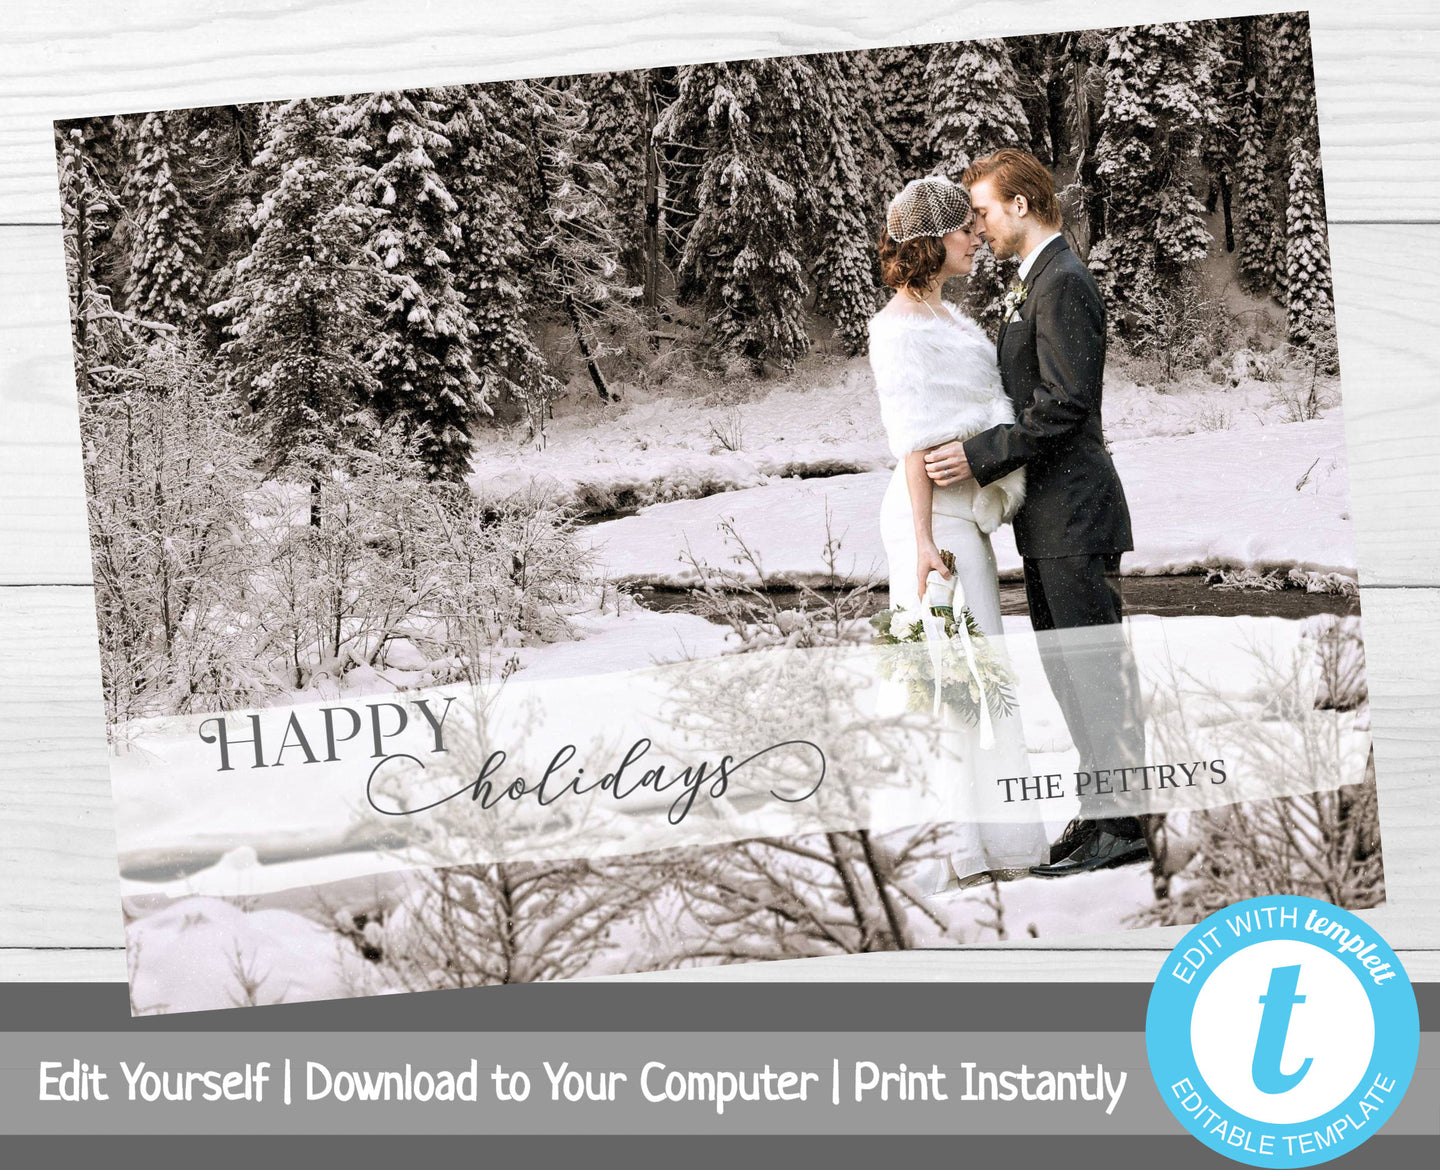 Christmas Card with Photo, Photo Holiday Card, Newlywed Christmas Card, Happy Holidays, Merry Christmas, Printable Christmas Card, Editable